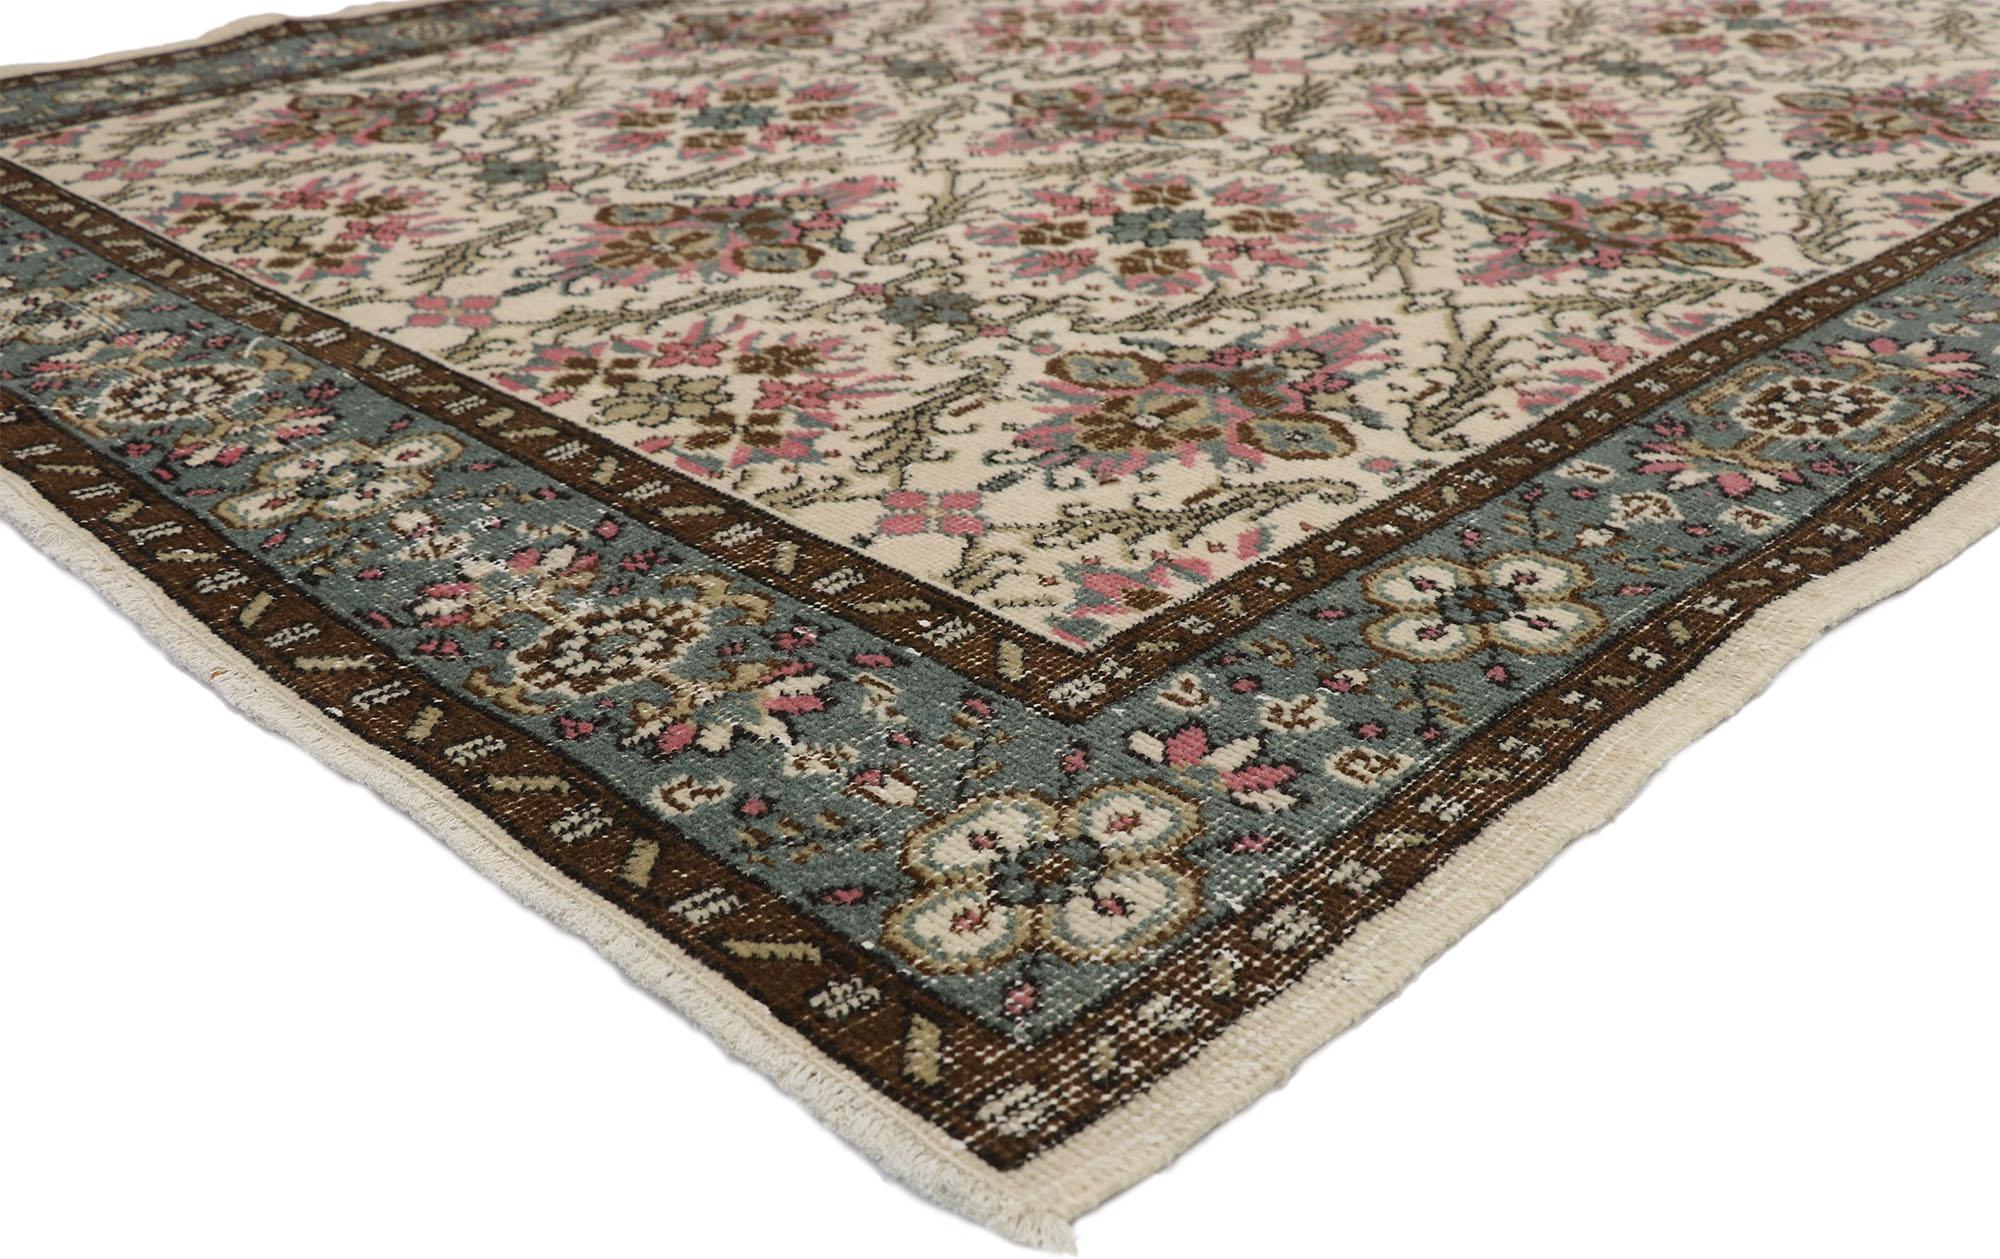 52573 Zeki Muren Distressed Vintage Turkish Sivas rug with Swedish cottage Gustavian style. Whimsy and rusticity collide in this hand knotted wool distressed vintage Turkish Sivas rug. It features an all-over floral trellis composed of alternating